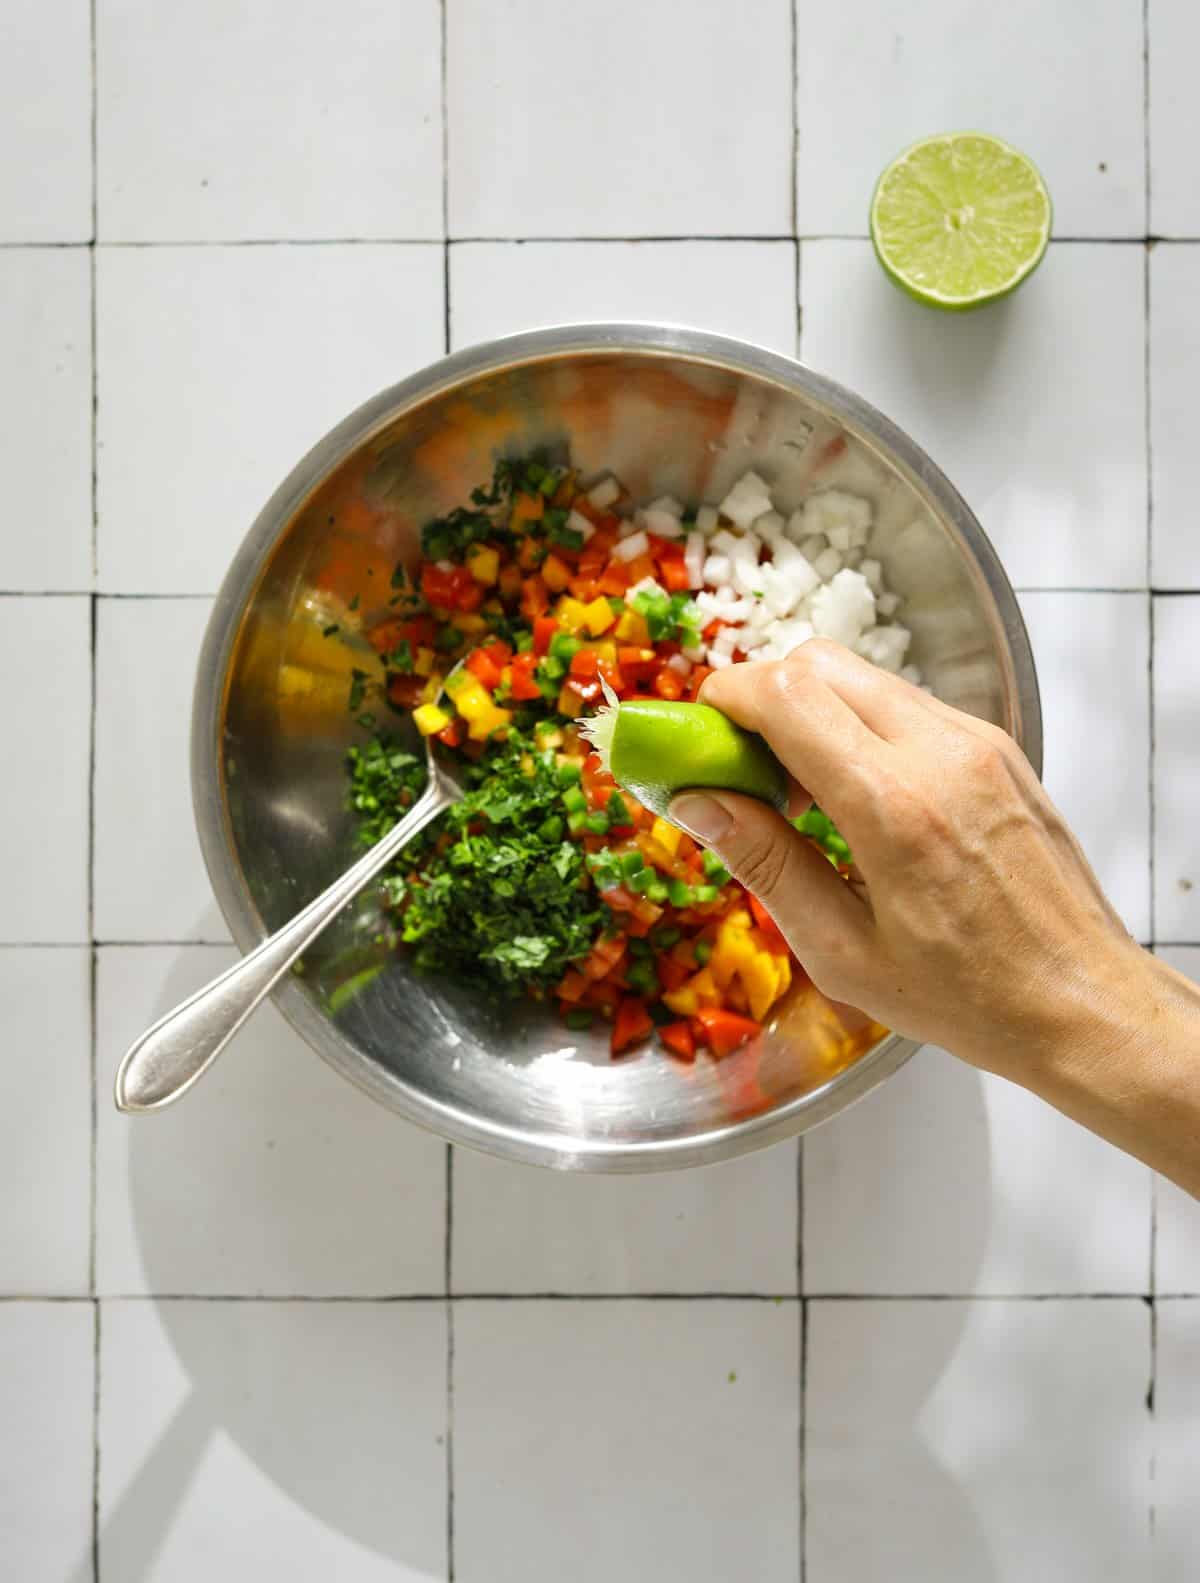 A mixing bowl filled with chopped salsa ingredients and a hand squeezing lime juice into the bowl.